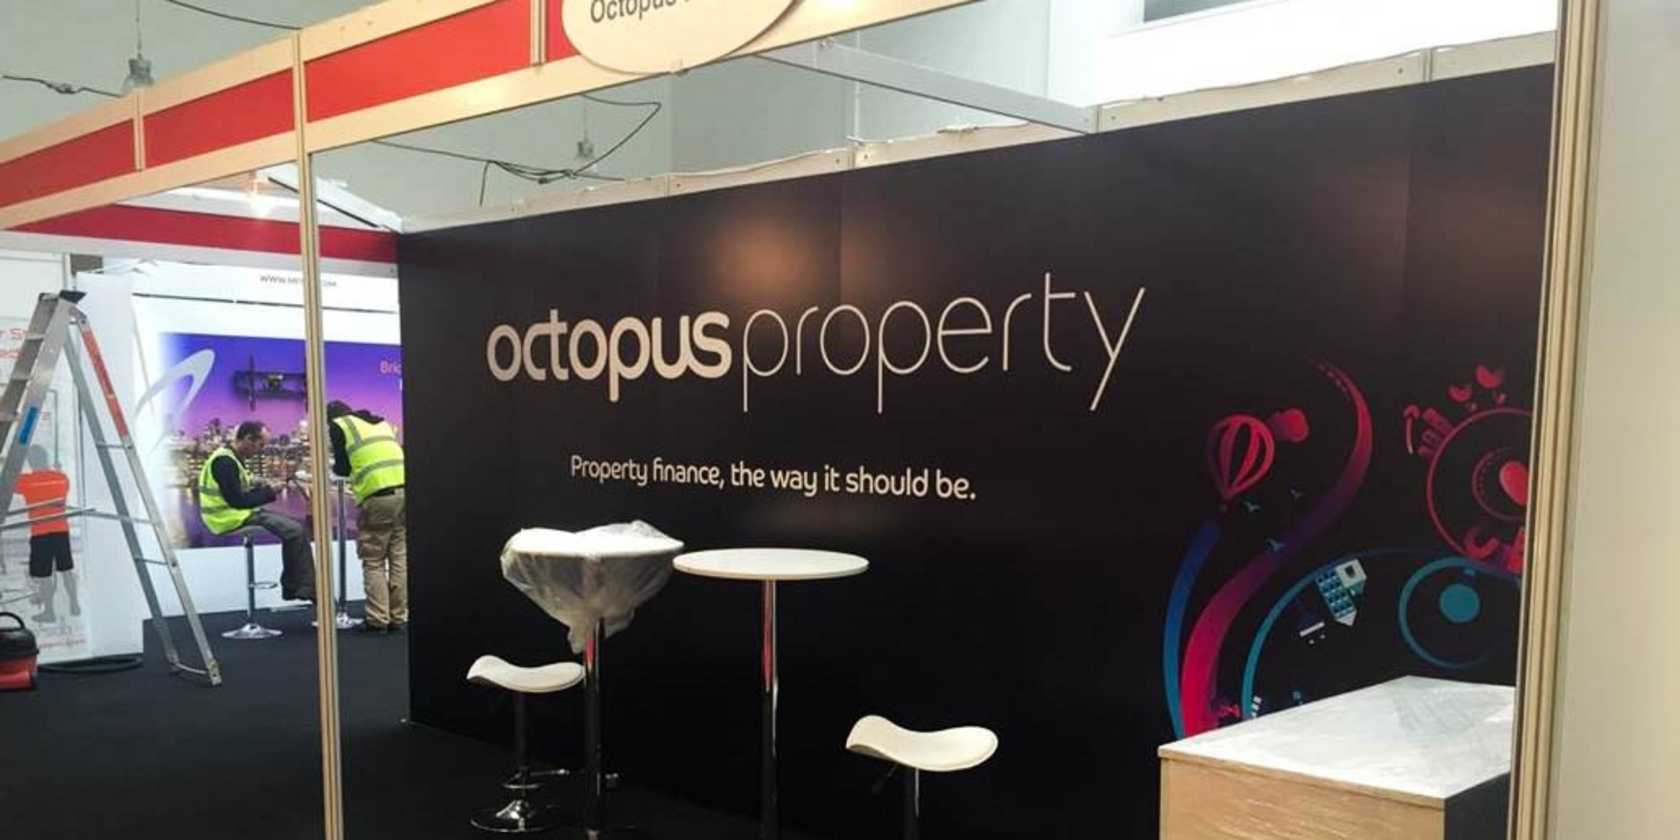 Exhibition Wall Panels for Octopus Property